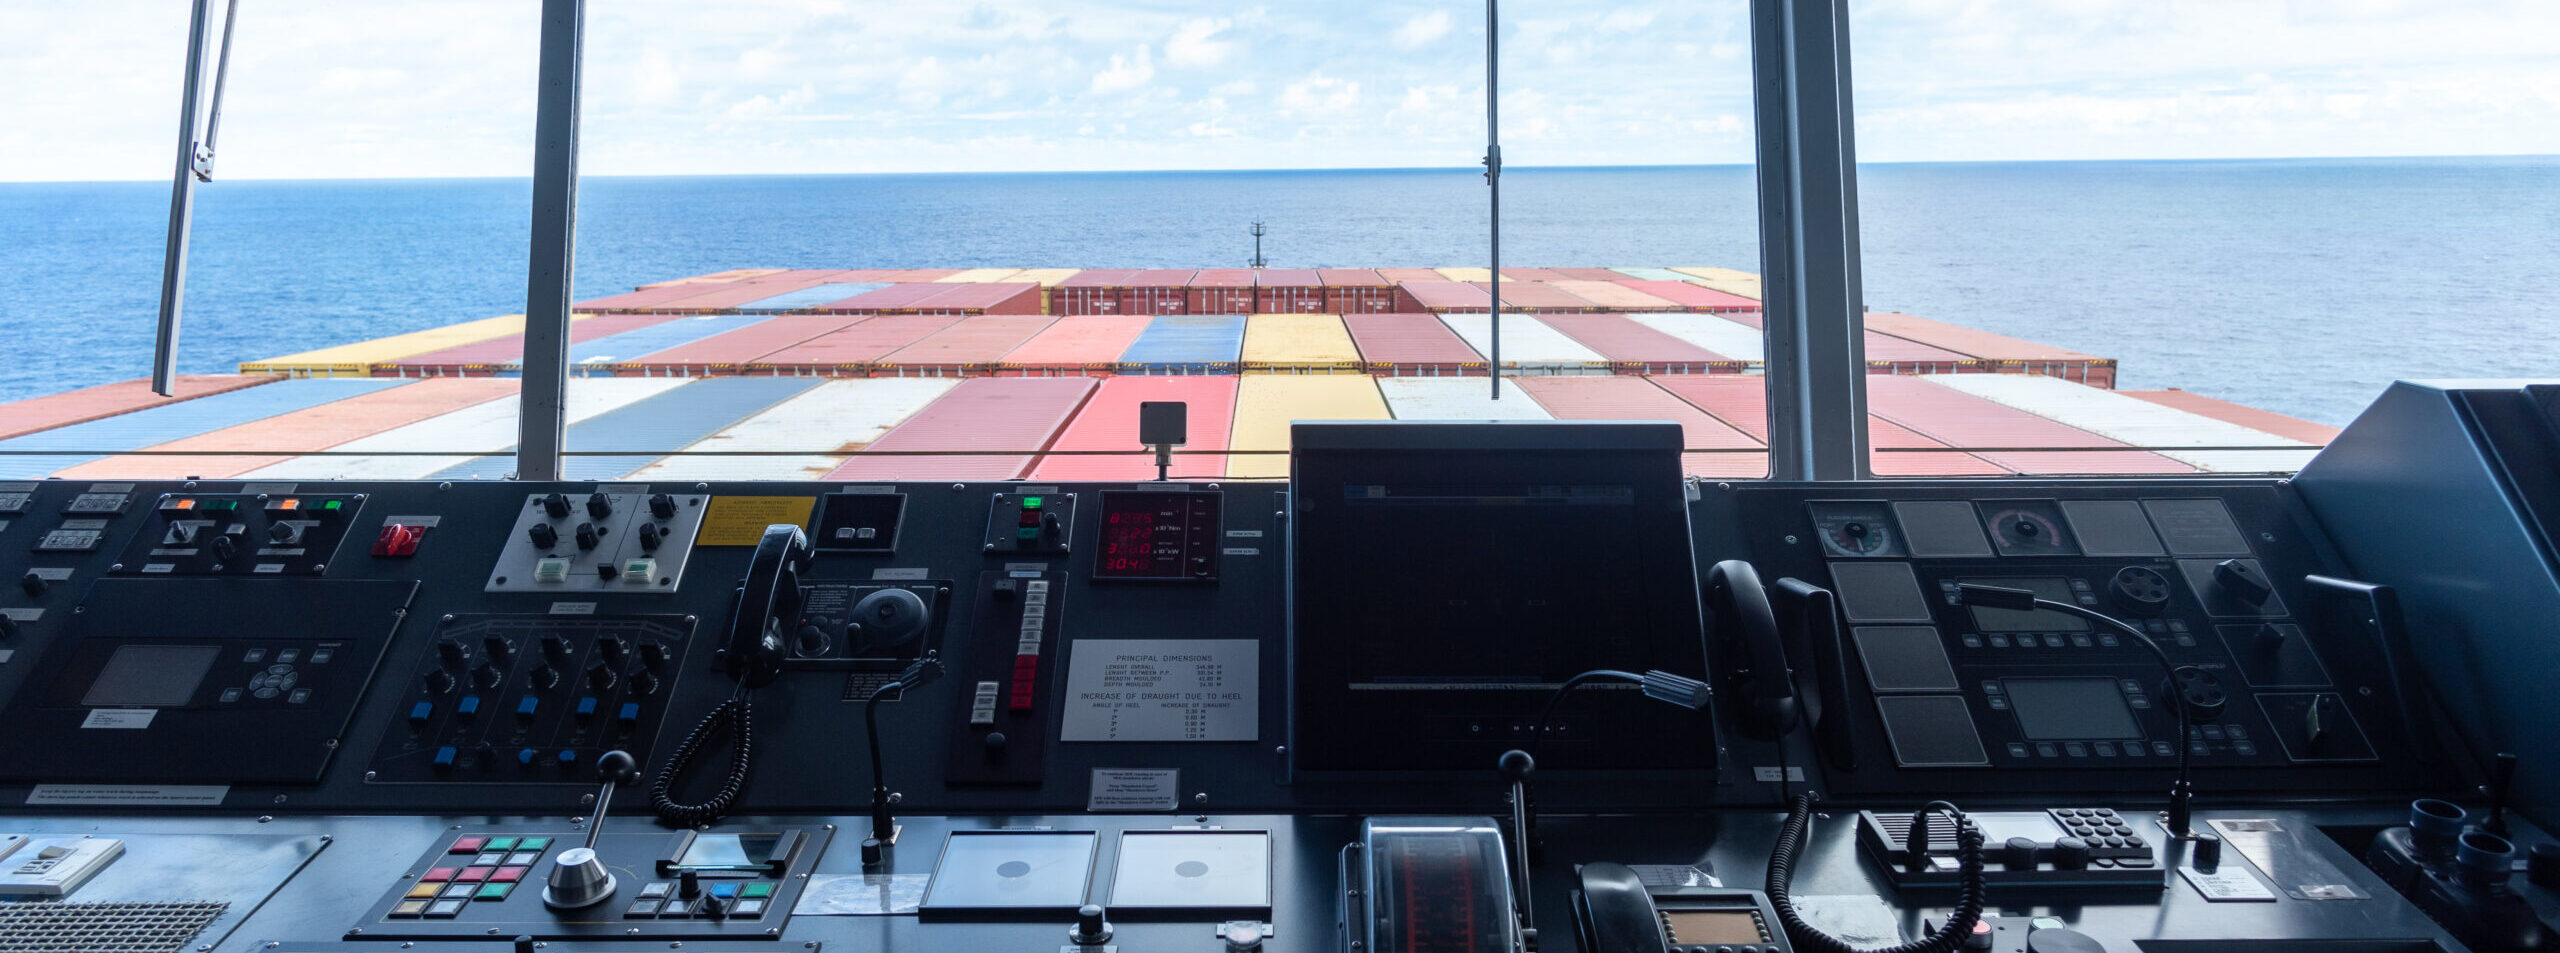 View,Of,The,Control,Console,On,The,Navigational,Bridge,Of